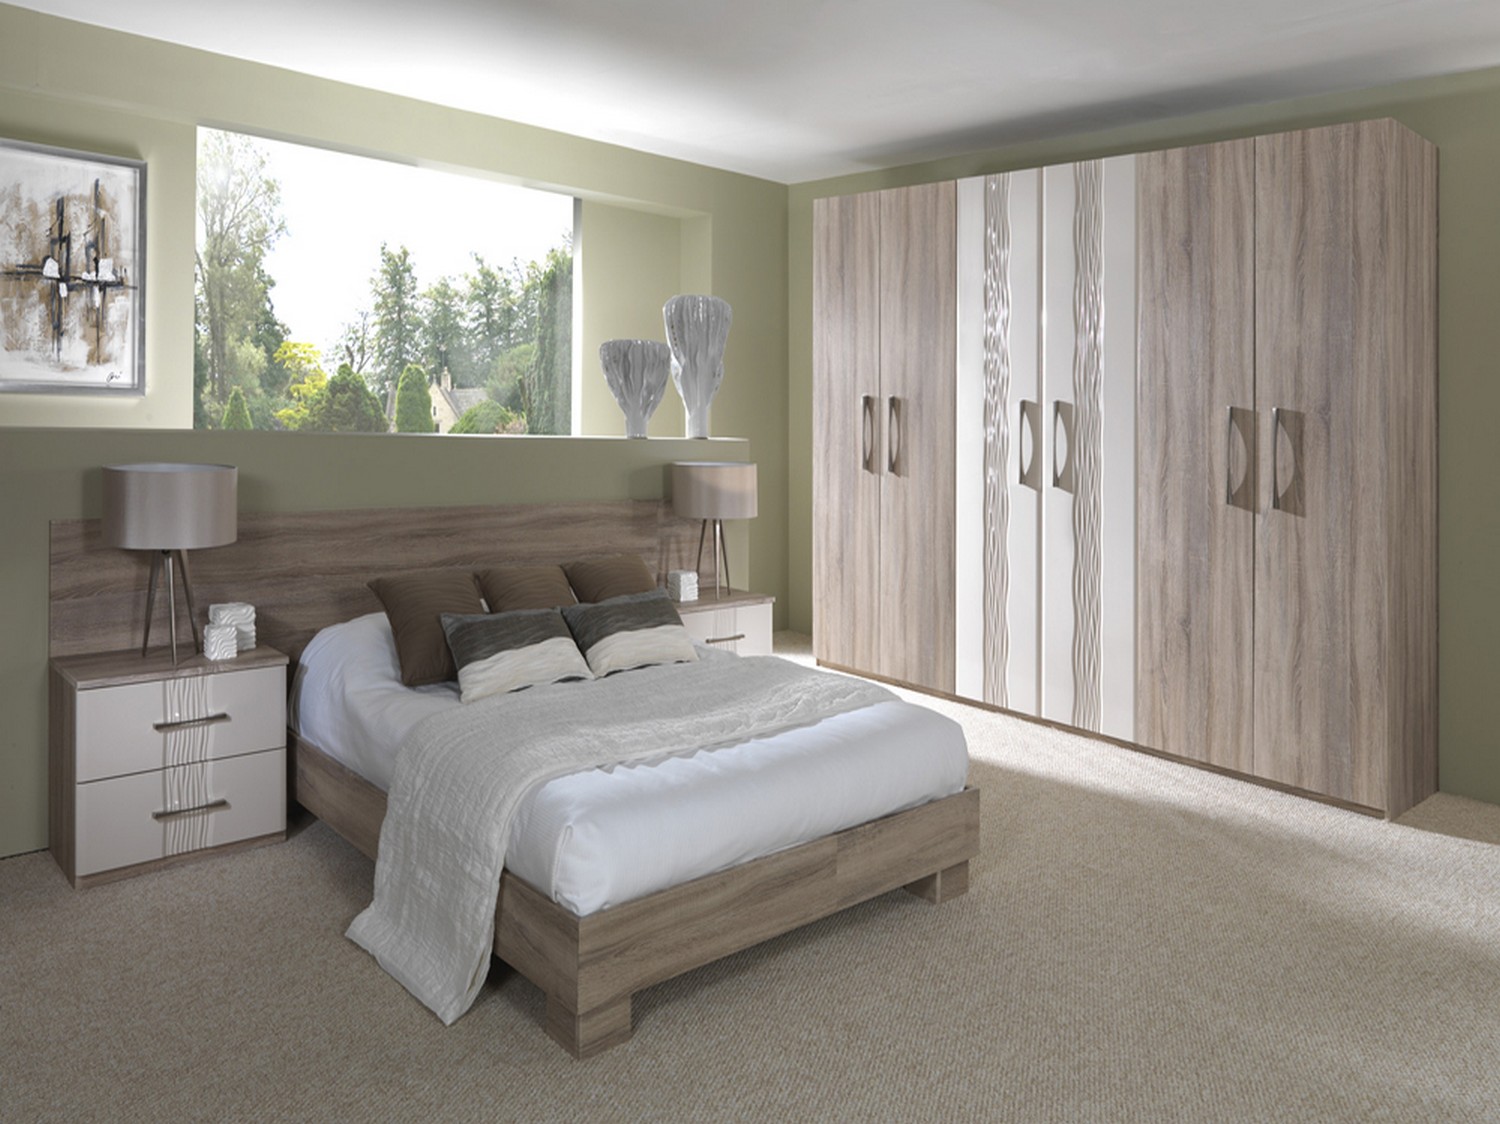 Oak and gloss cream bedroom furniture designed as a complete bedroom furniture solution including bed, headboard, wardrobe and bed sides tables. The gloss cream doors feature an inset pattern combined with a simple chrome handle for a contemporary look.